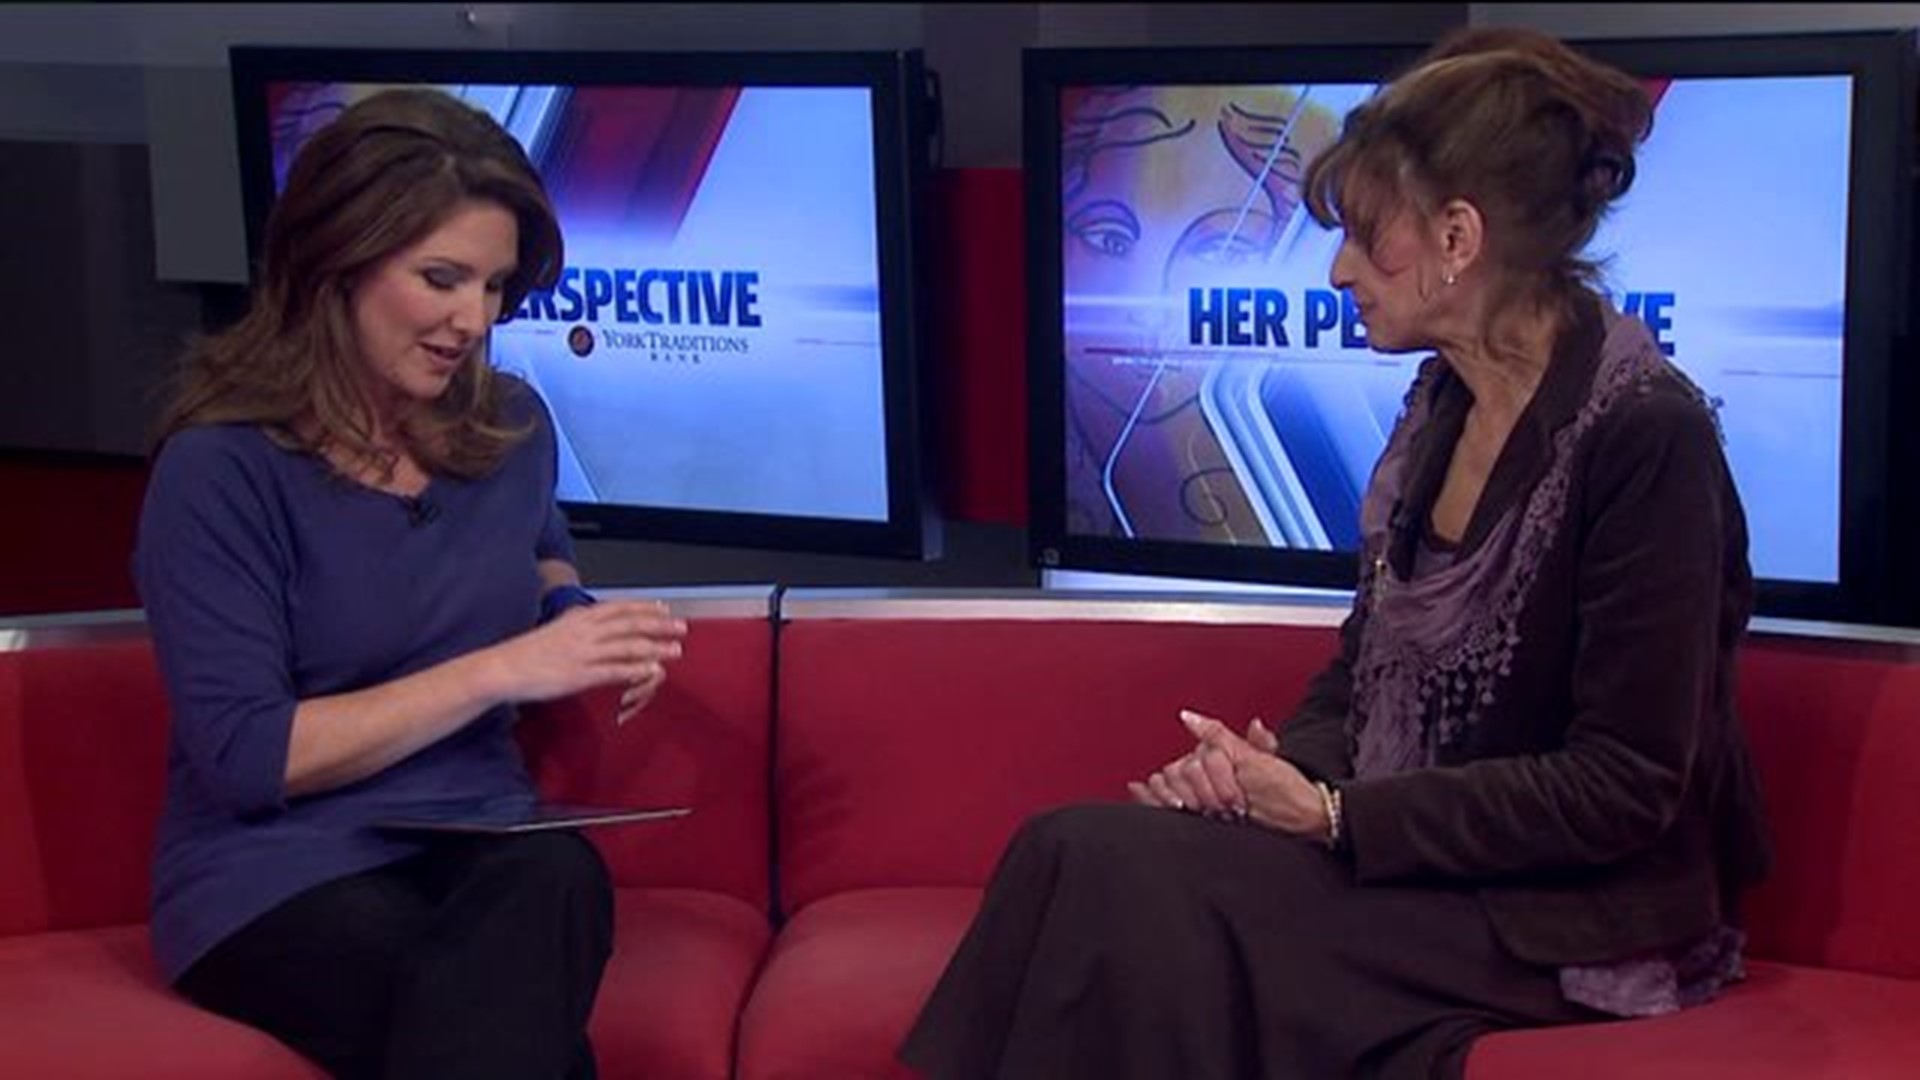 "Her Perspective" Executive Director of York Little Theatre